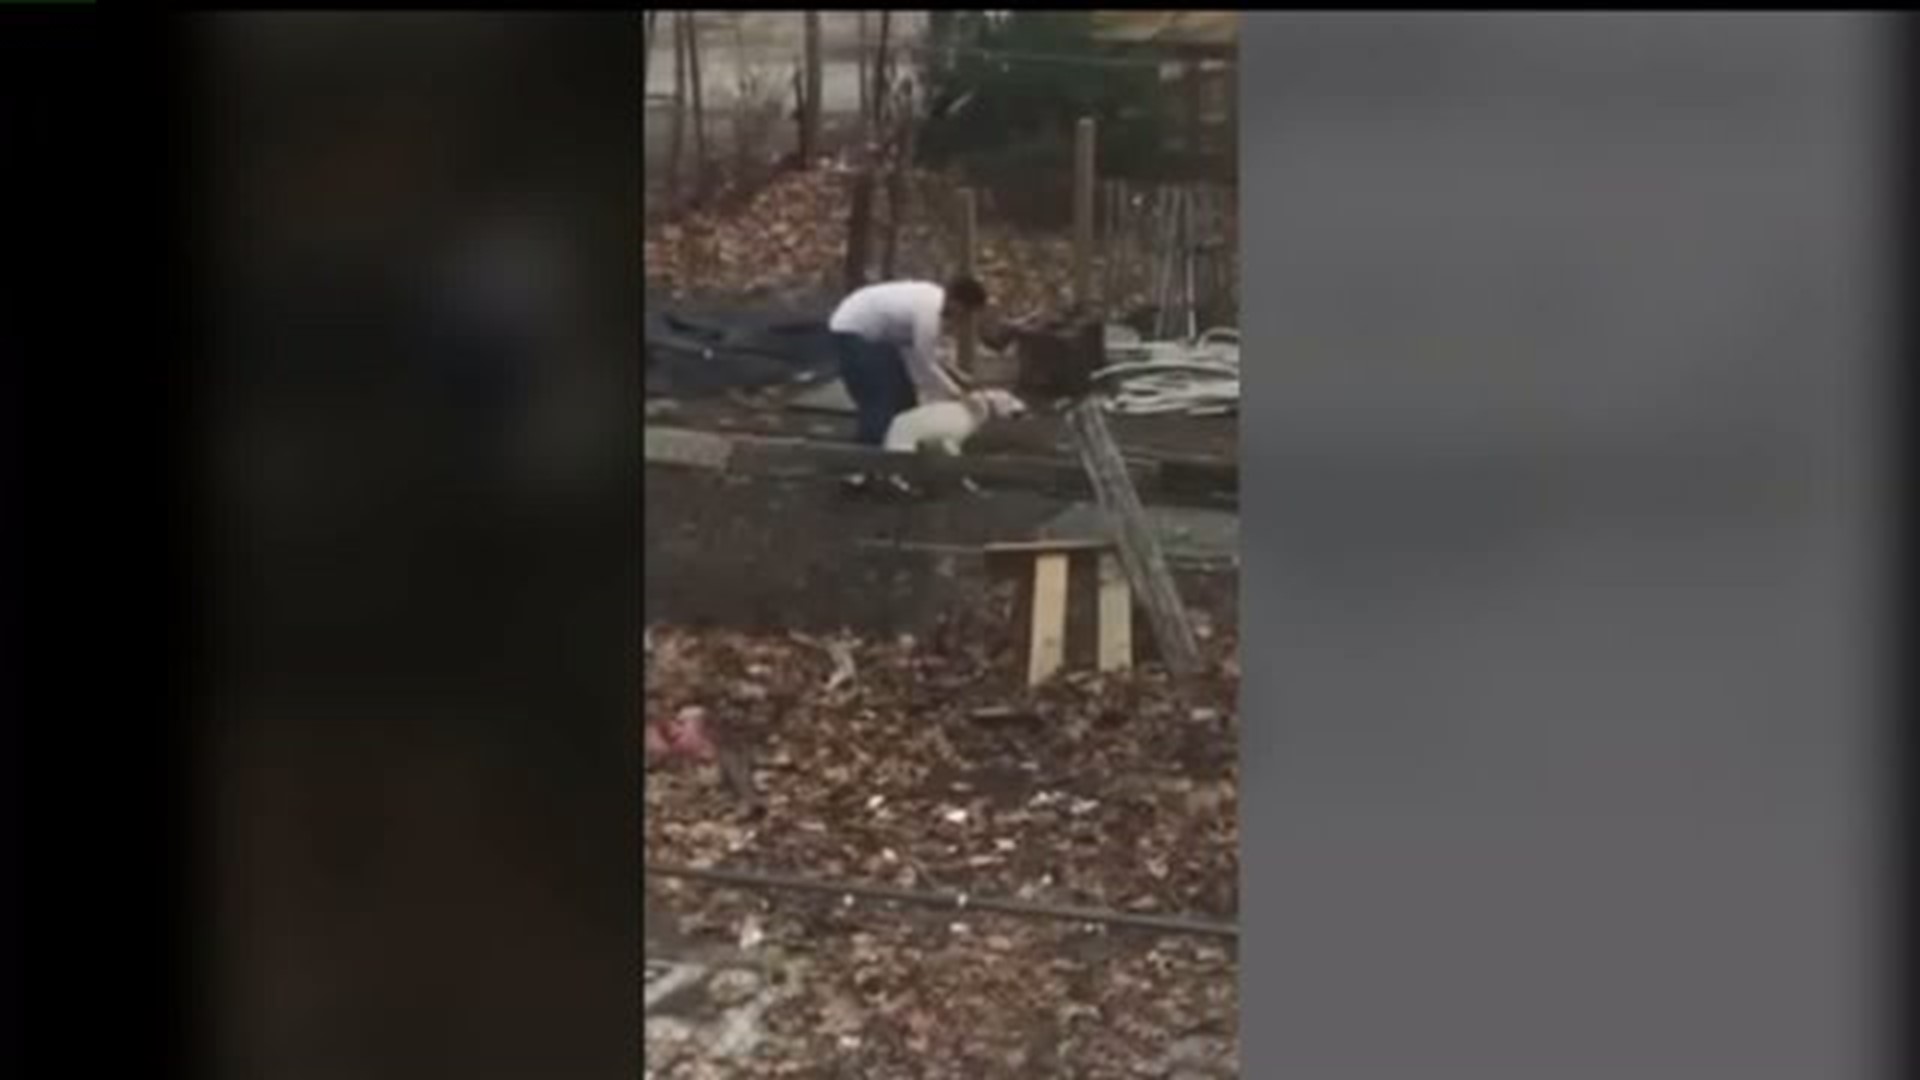 Video of dog beating prompts calls for justice from neighbors, animal rescuers